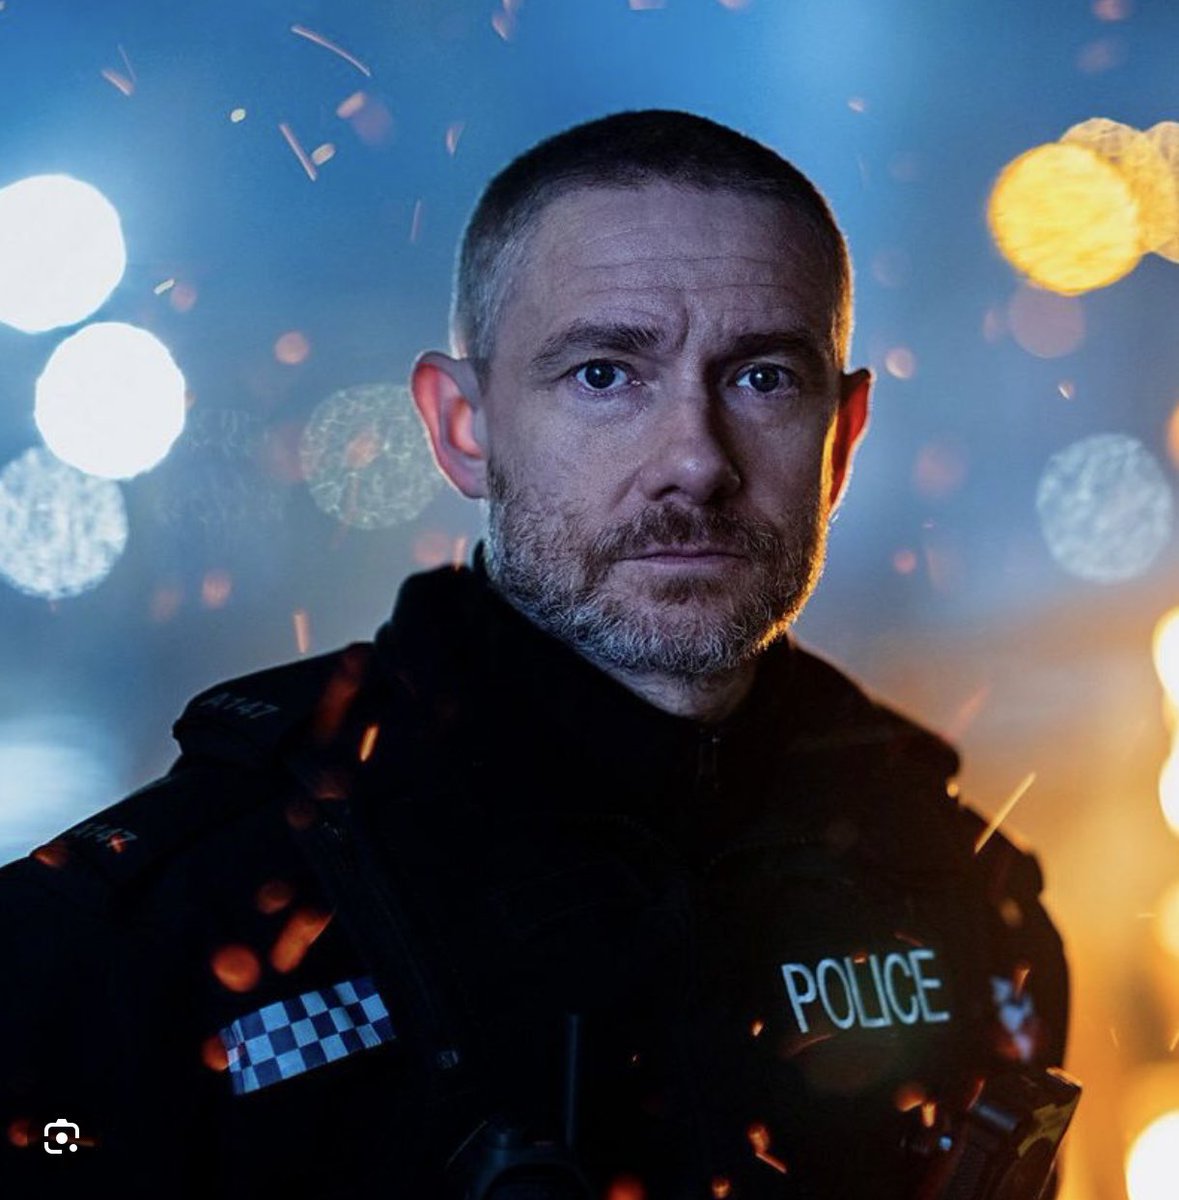 So excited! The Responder season 2 starts on Sunday! The best series ever with Martin Freeman who is excellent! #TheResponder #MartinFreeman